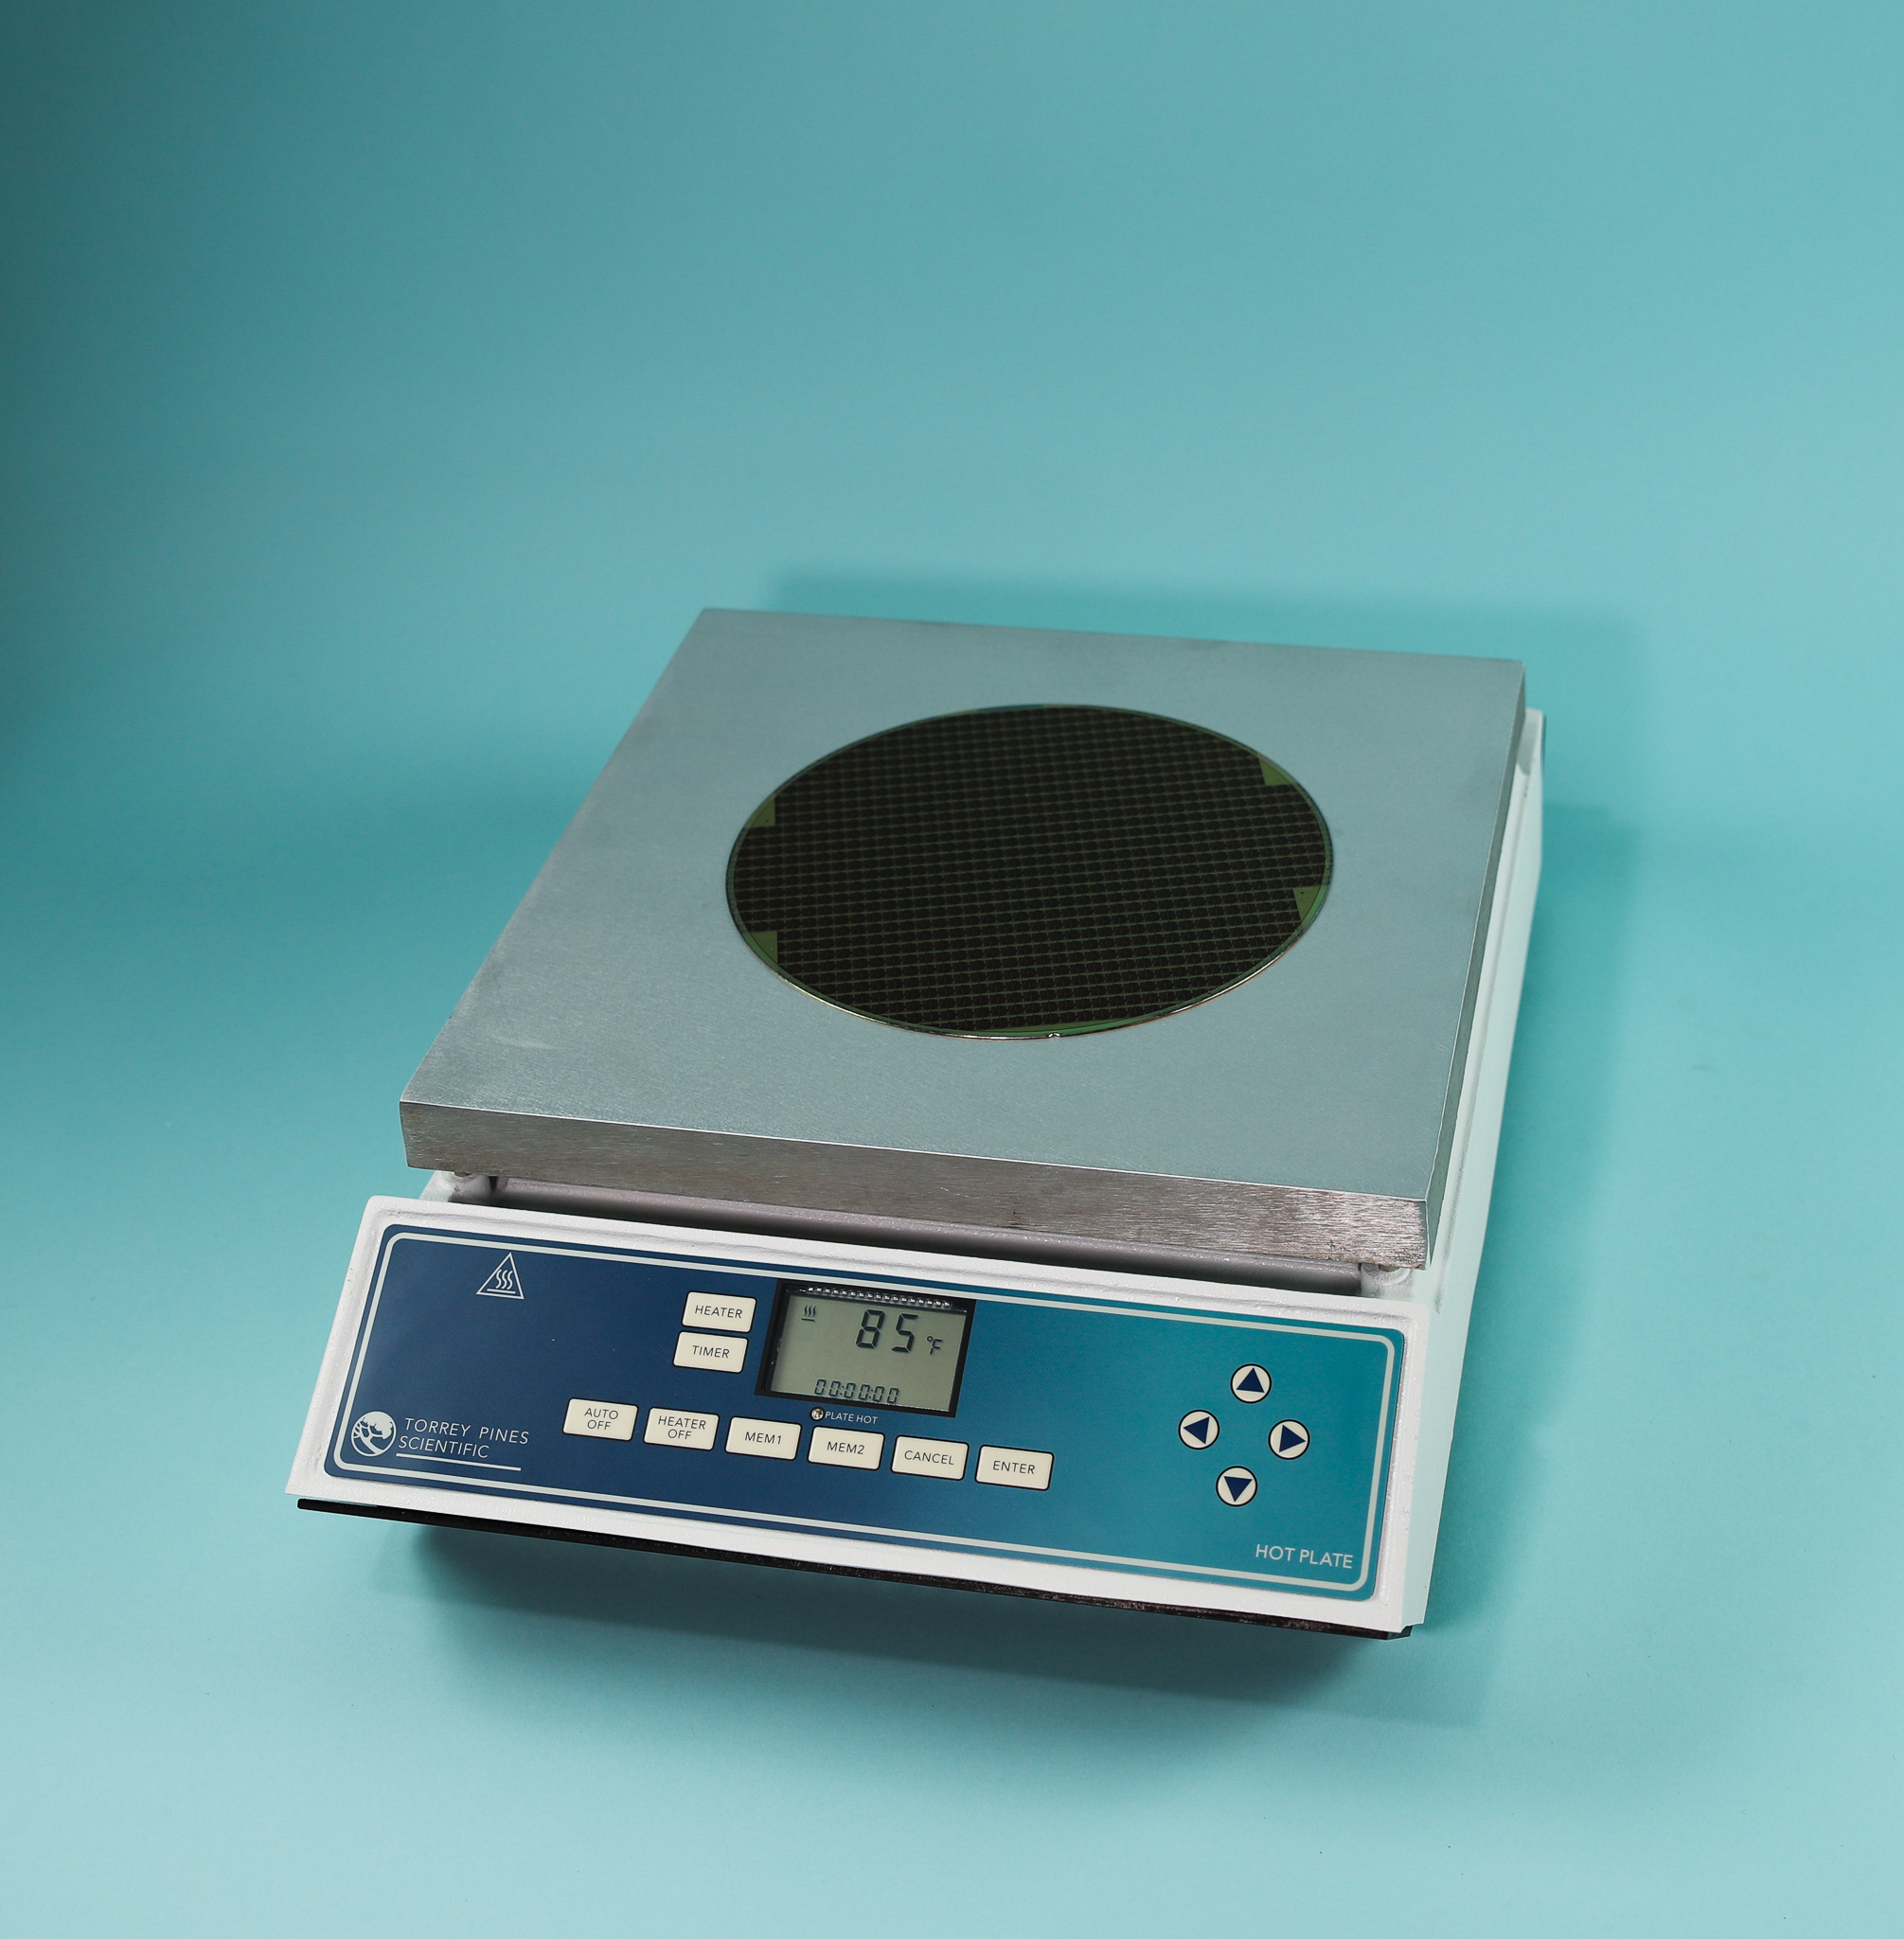 TP EchoTherm HP40-HS40 Fully Programmable Digital Hot Plates